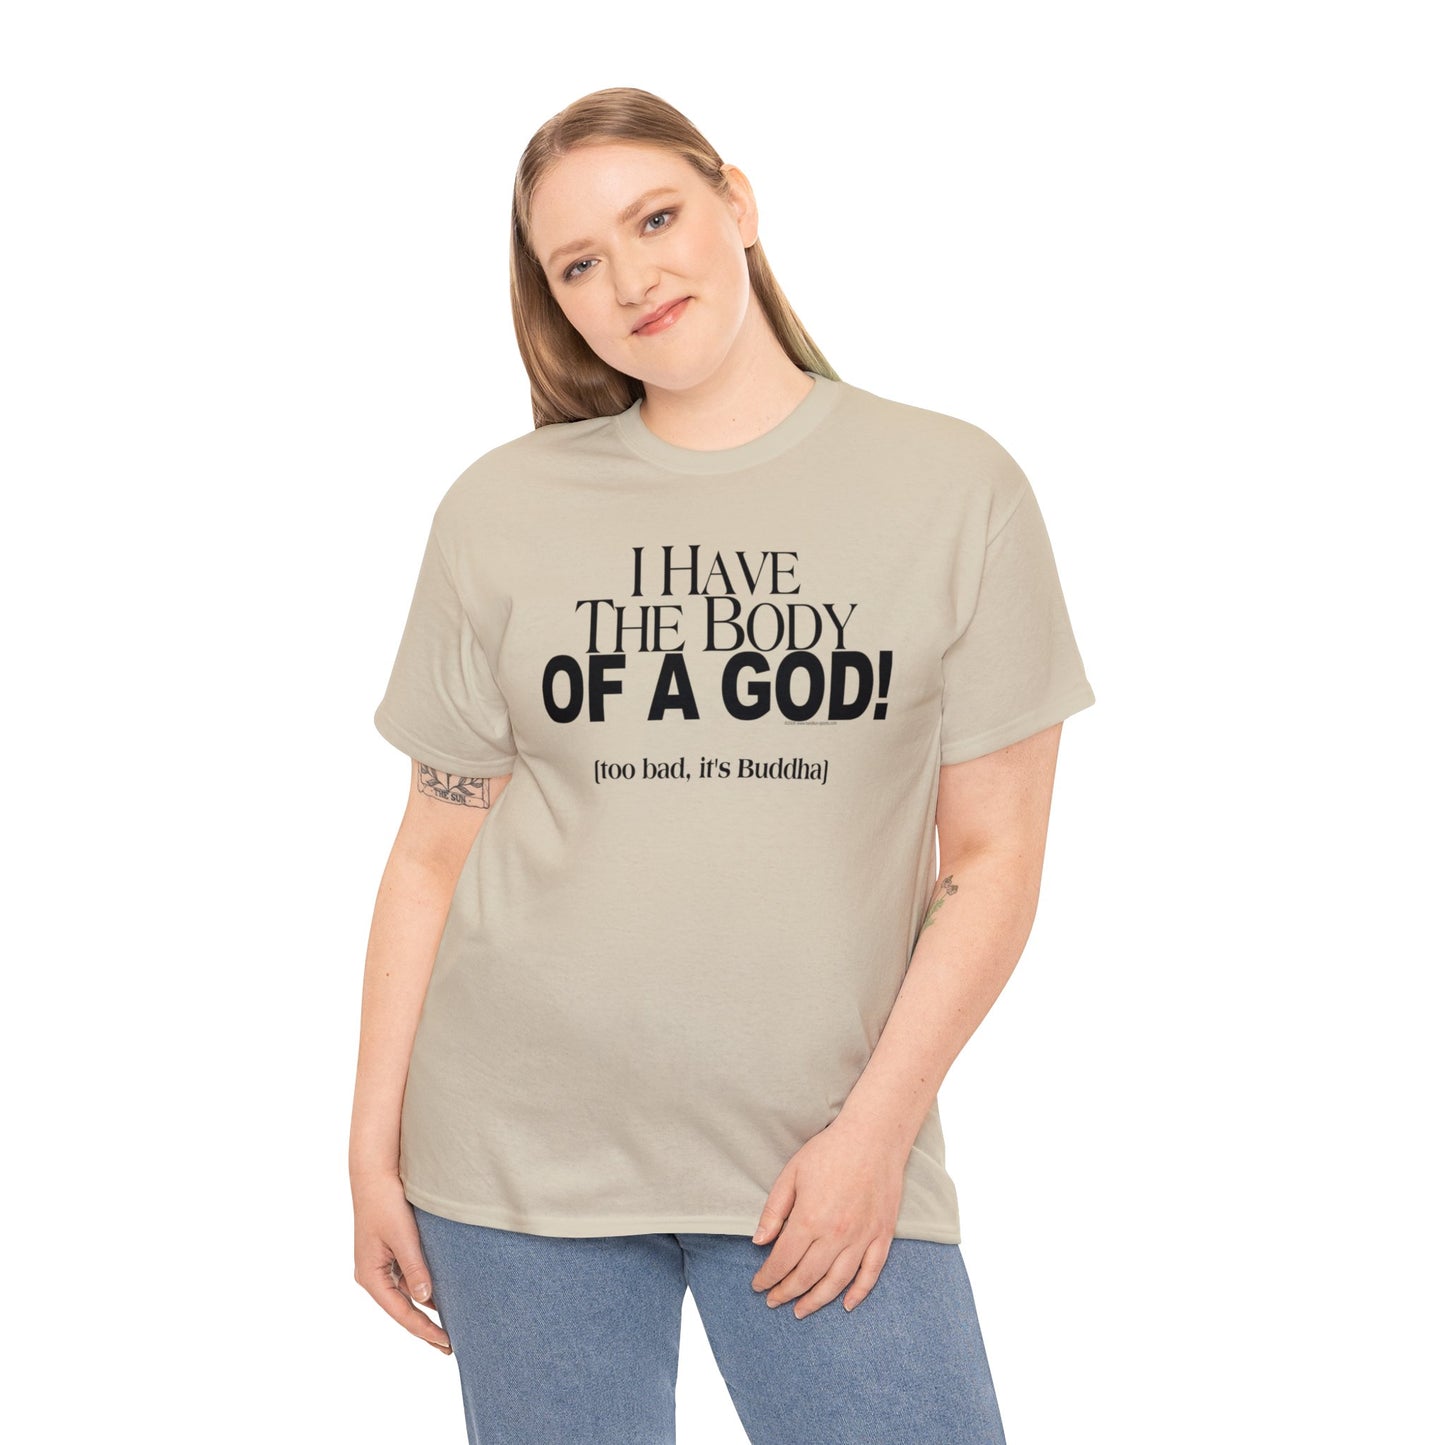 I have the Body of a God, Too bad it's Buddah funny t-shirt, humorous t-shirt, ironic t-shirt, t-shirt gift